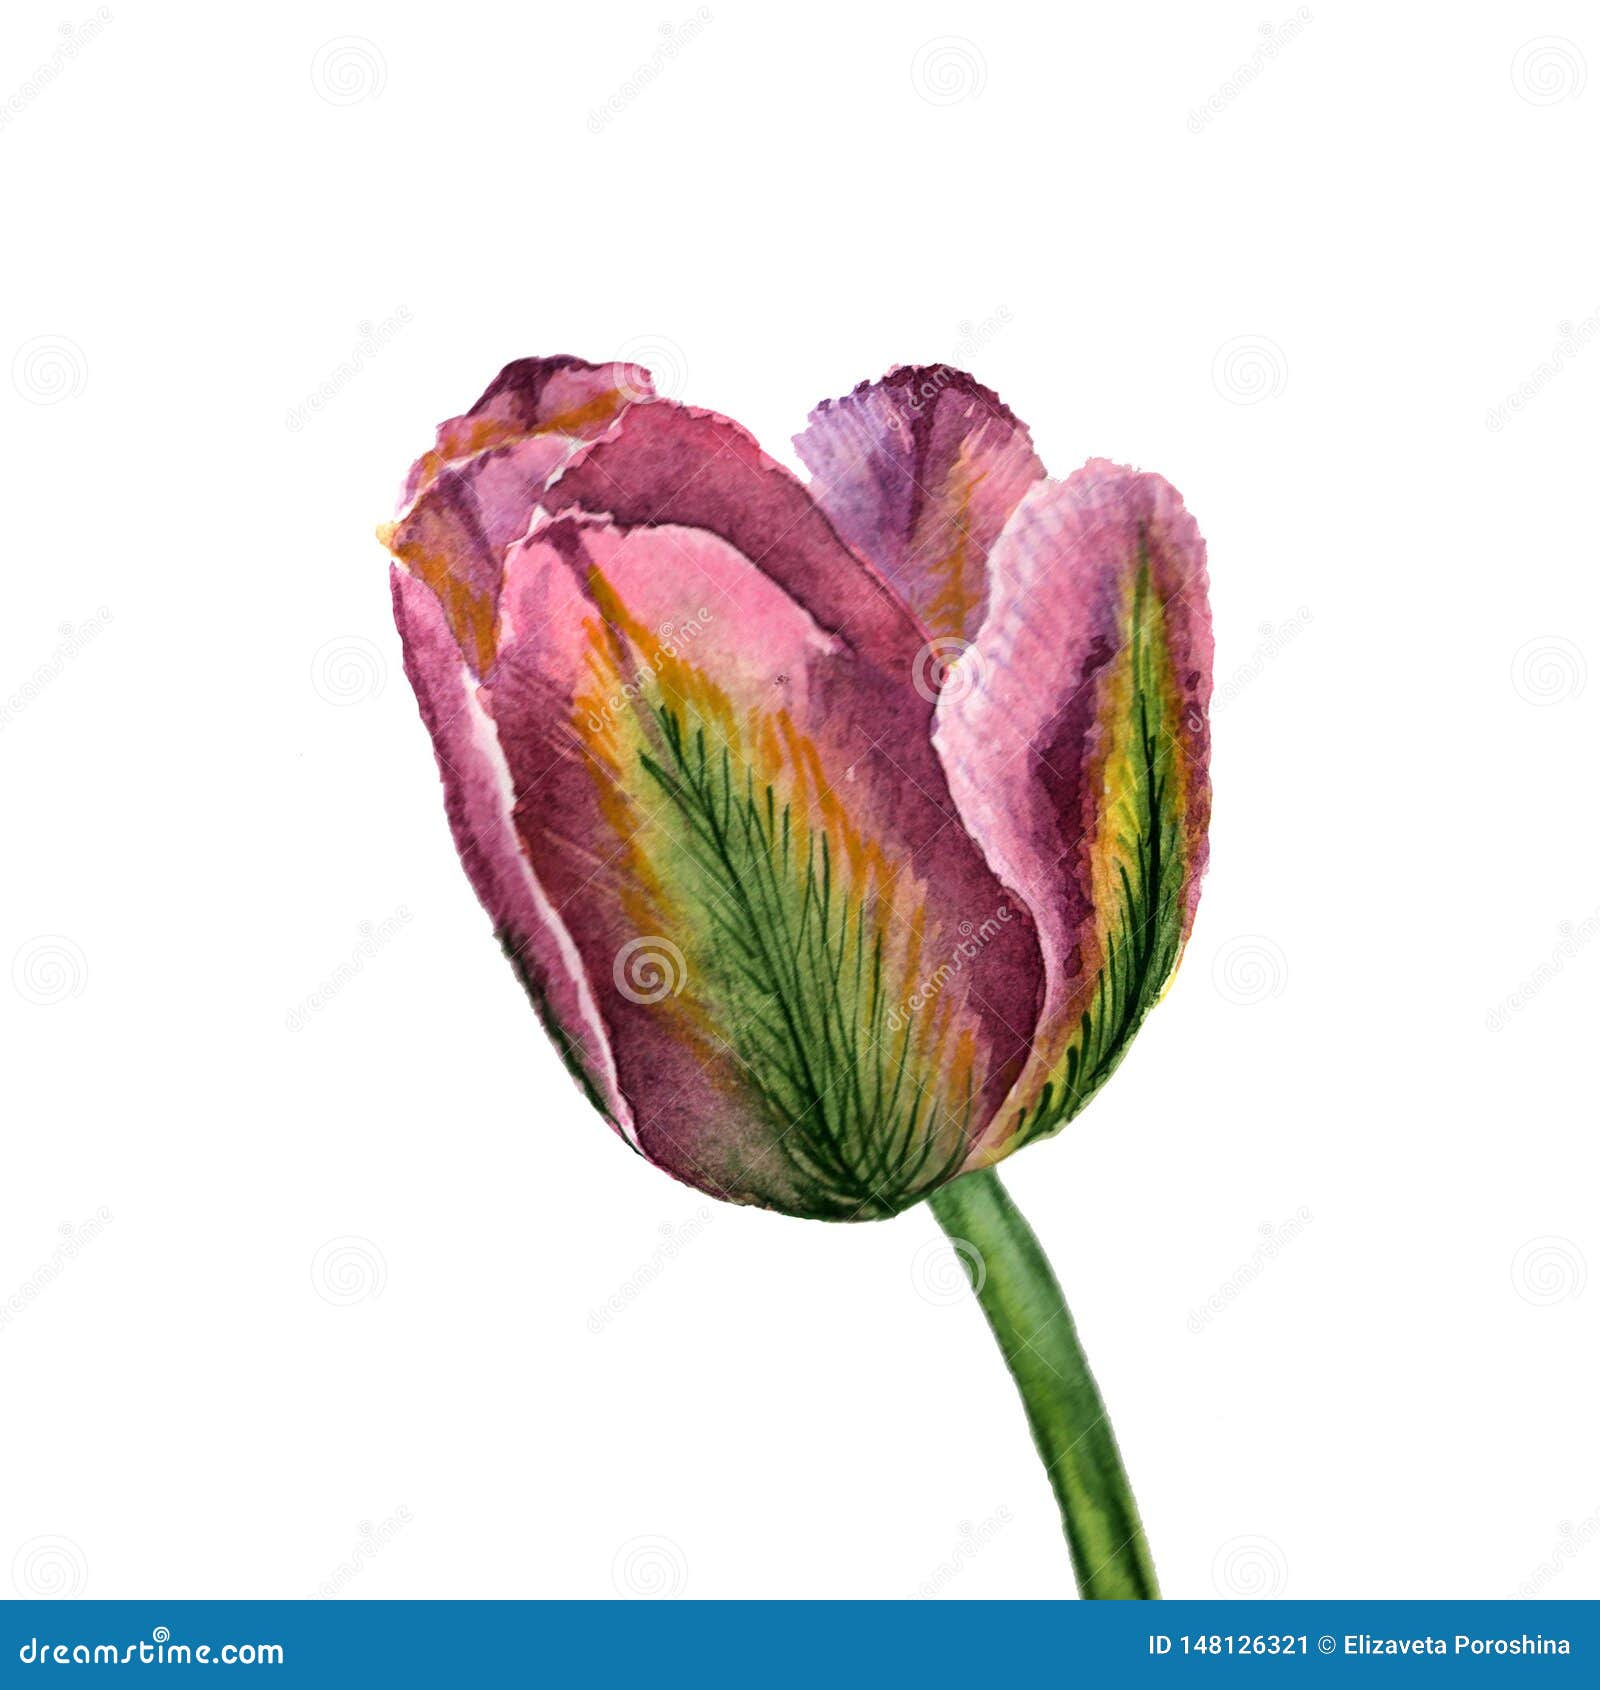 Flowers Watercolor Illustration. a Tender Pink-green Tulip on a White ...